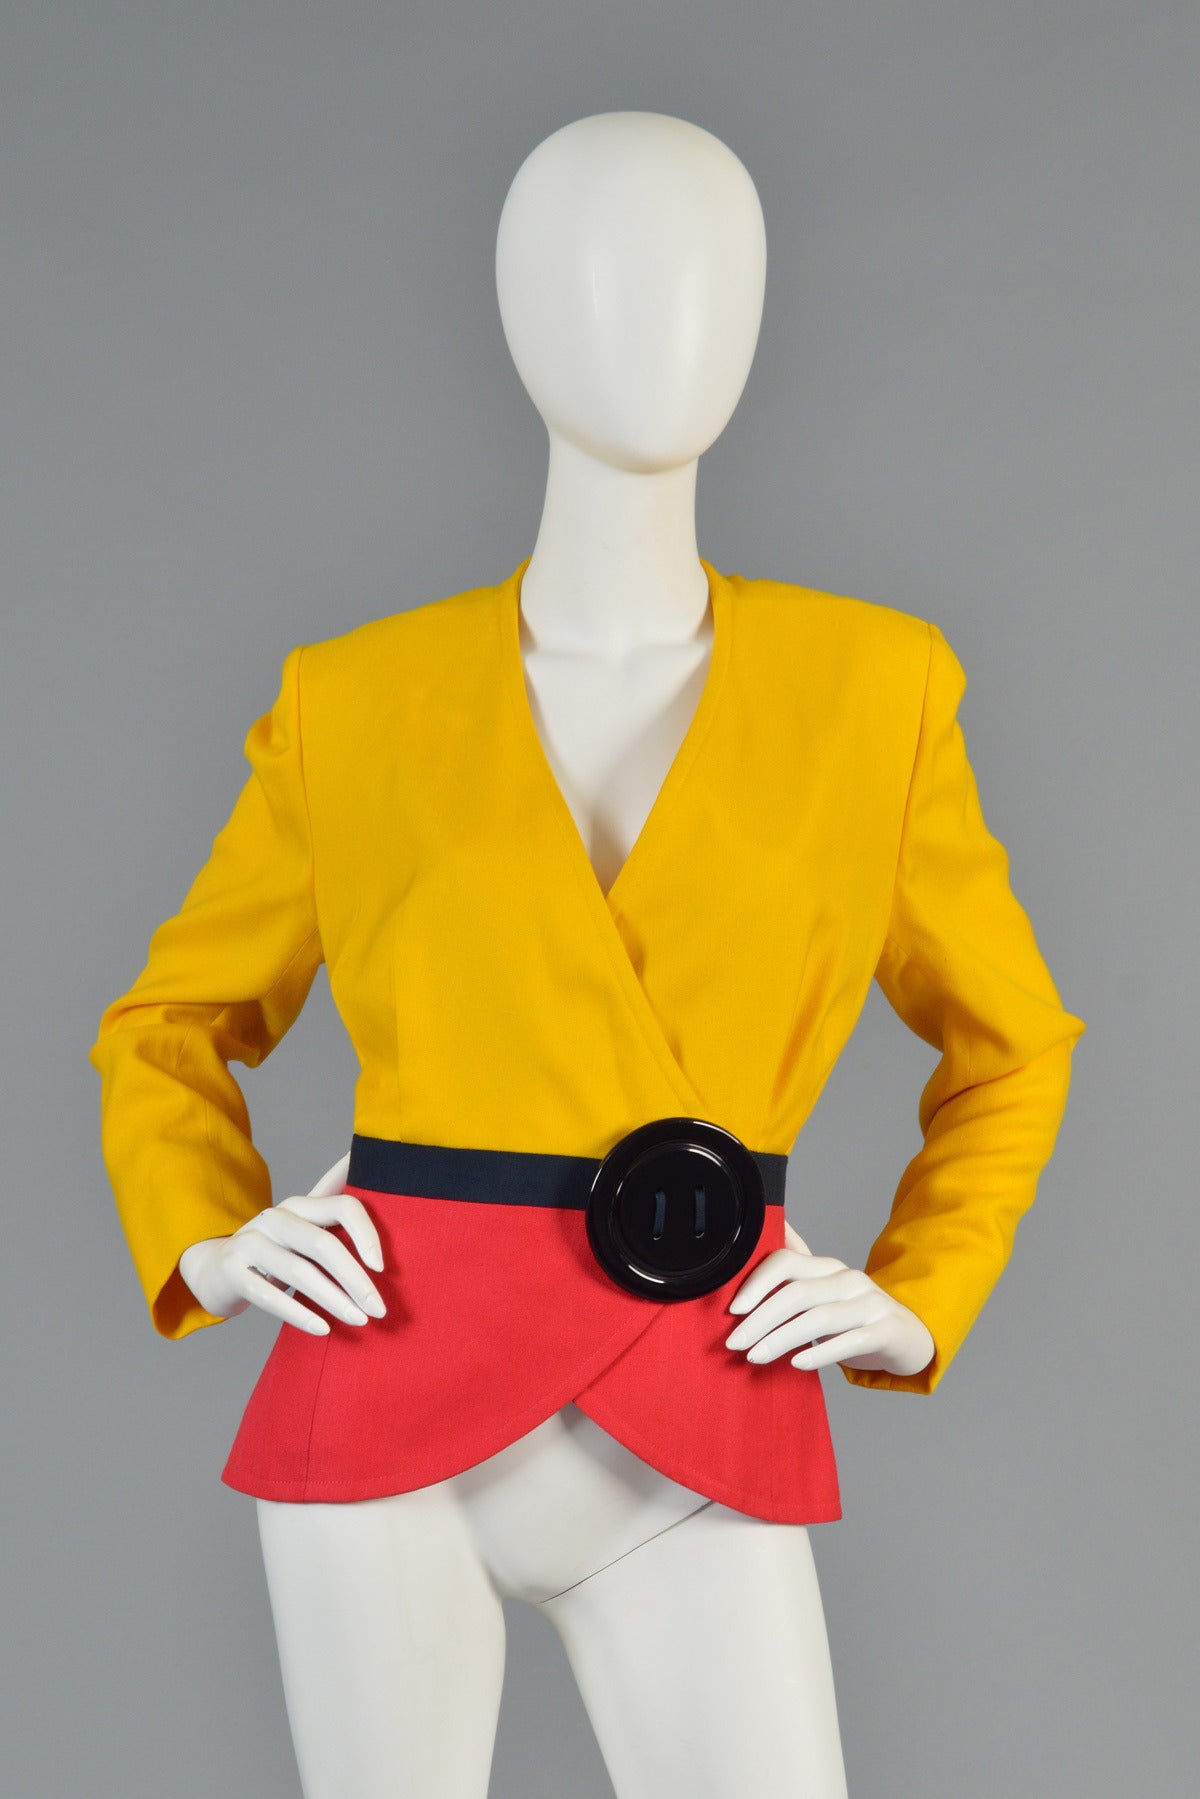 Absolutely awesome 1989 Pierre Balmain haute couture blazer designed by Oscar de la Renta. An extremely rare find find and right on trend for 2015!

Colorblocked slubbed silk body in banana yellow, bright watermelon and dark (almost black)